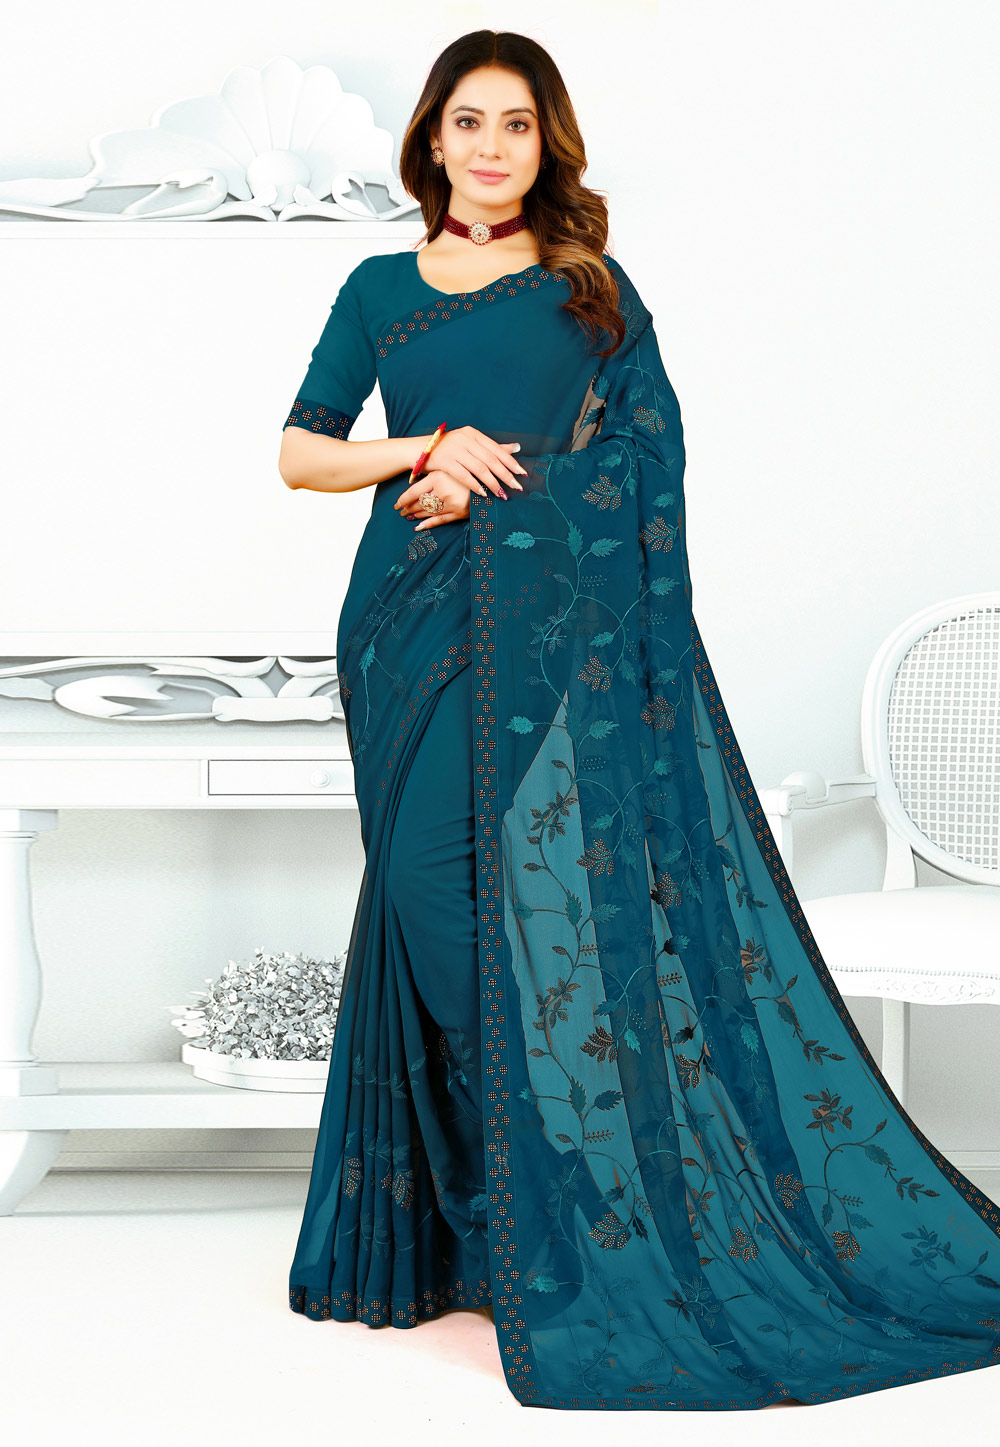 Teal Georgette Saree With Blouse 261421